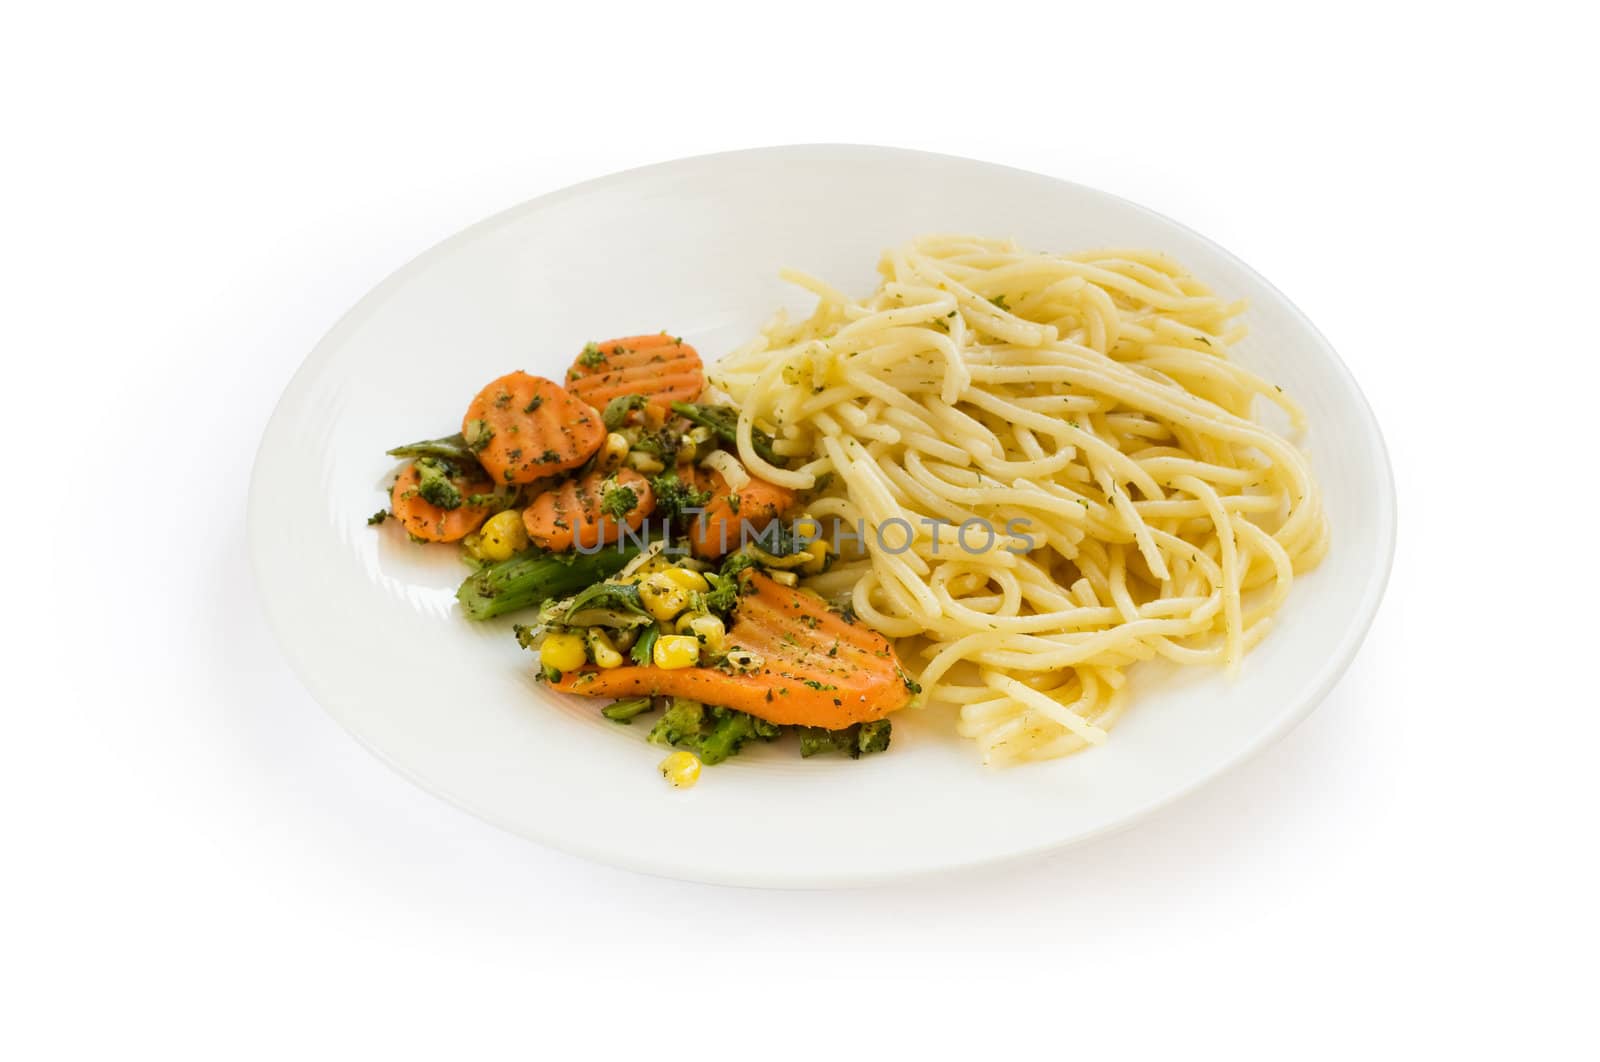 Spagheti with vegetables by ints